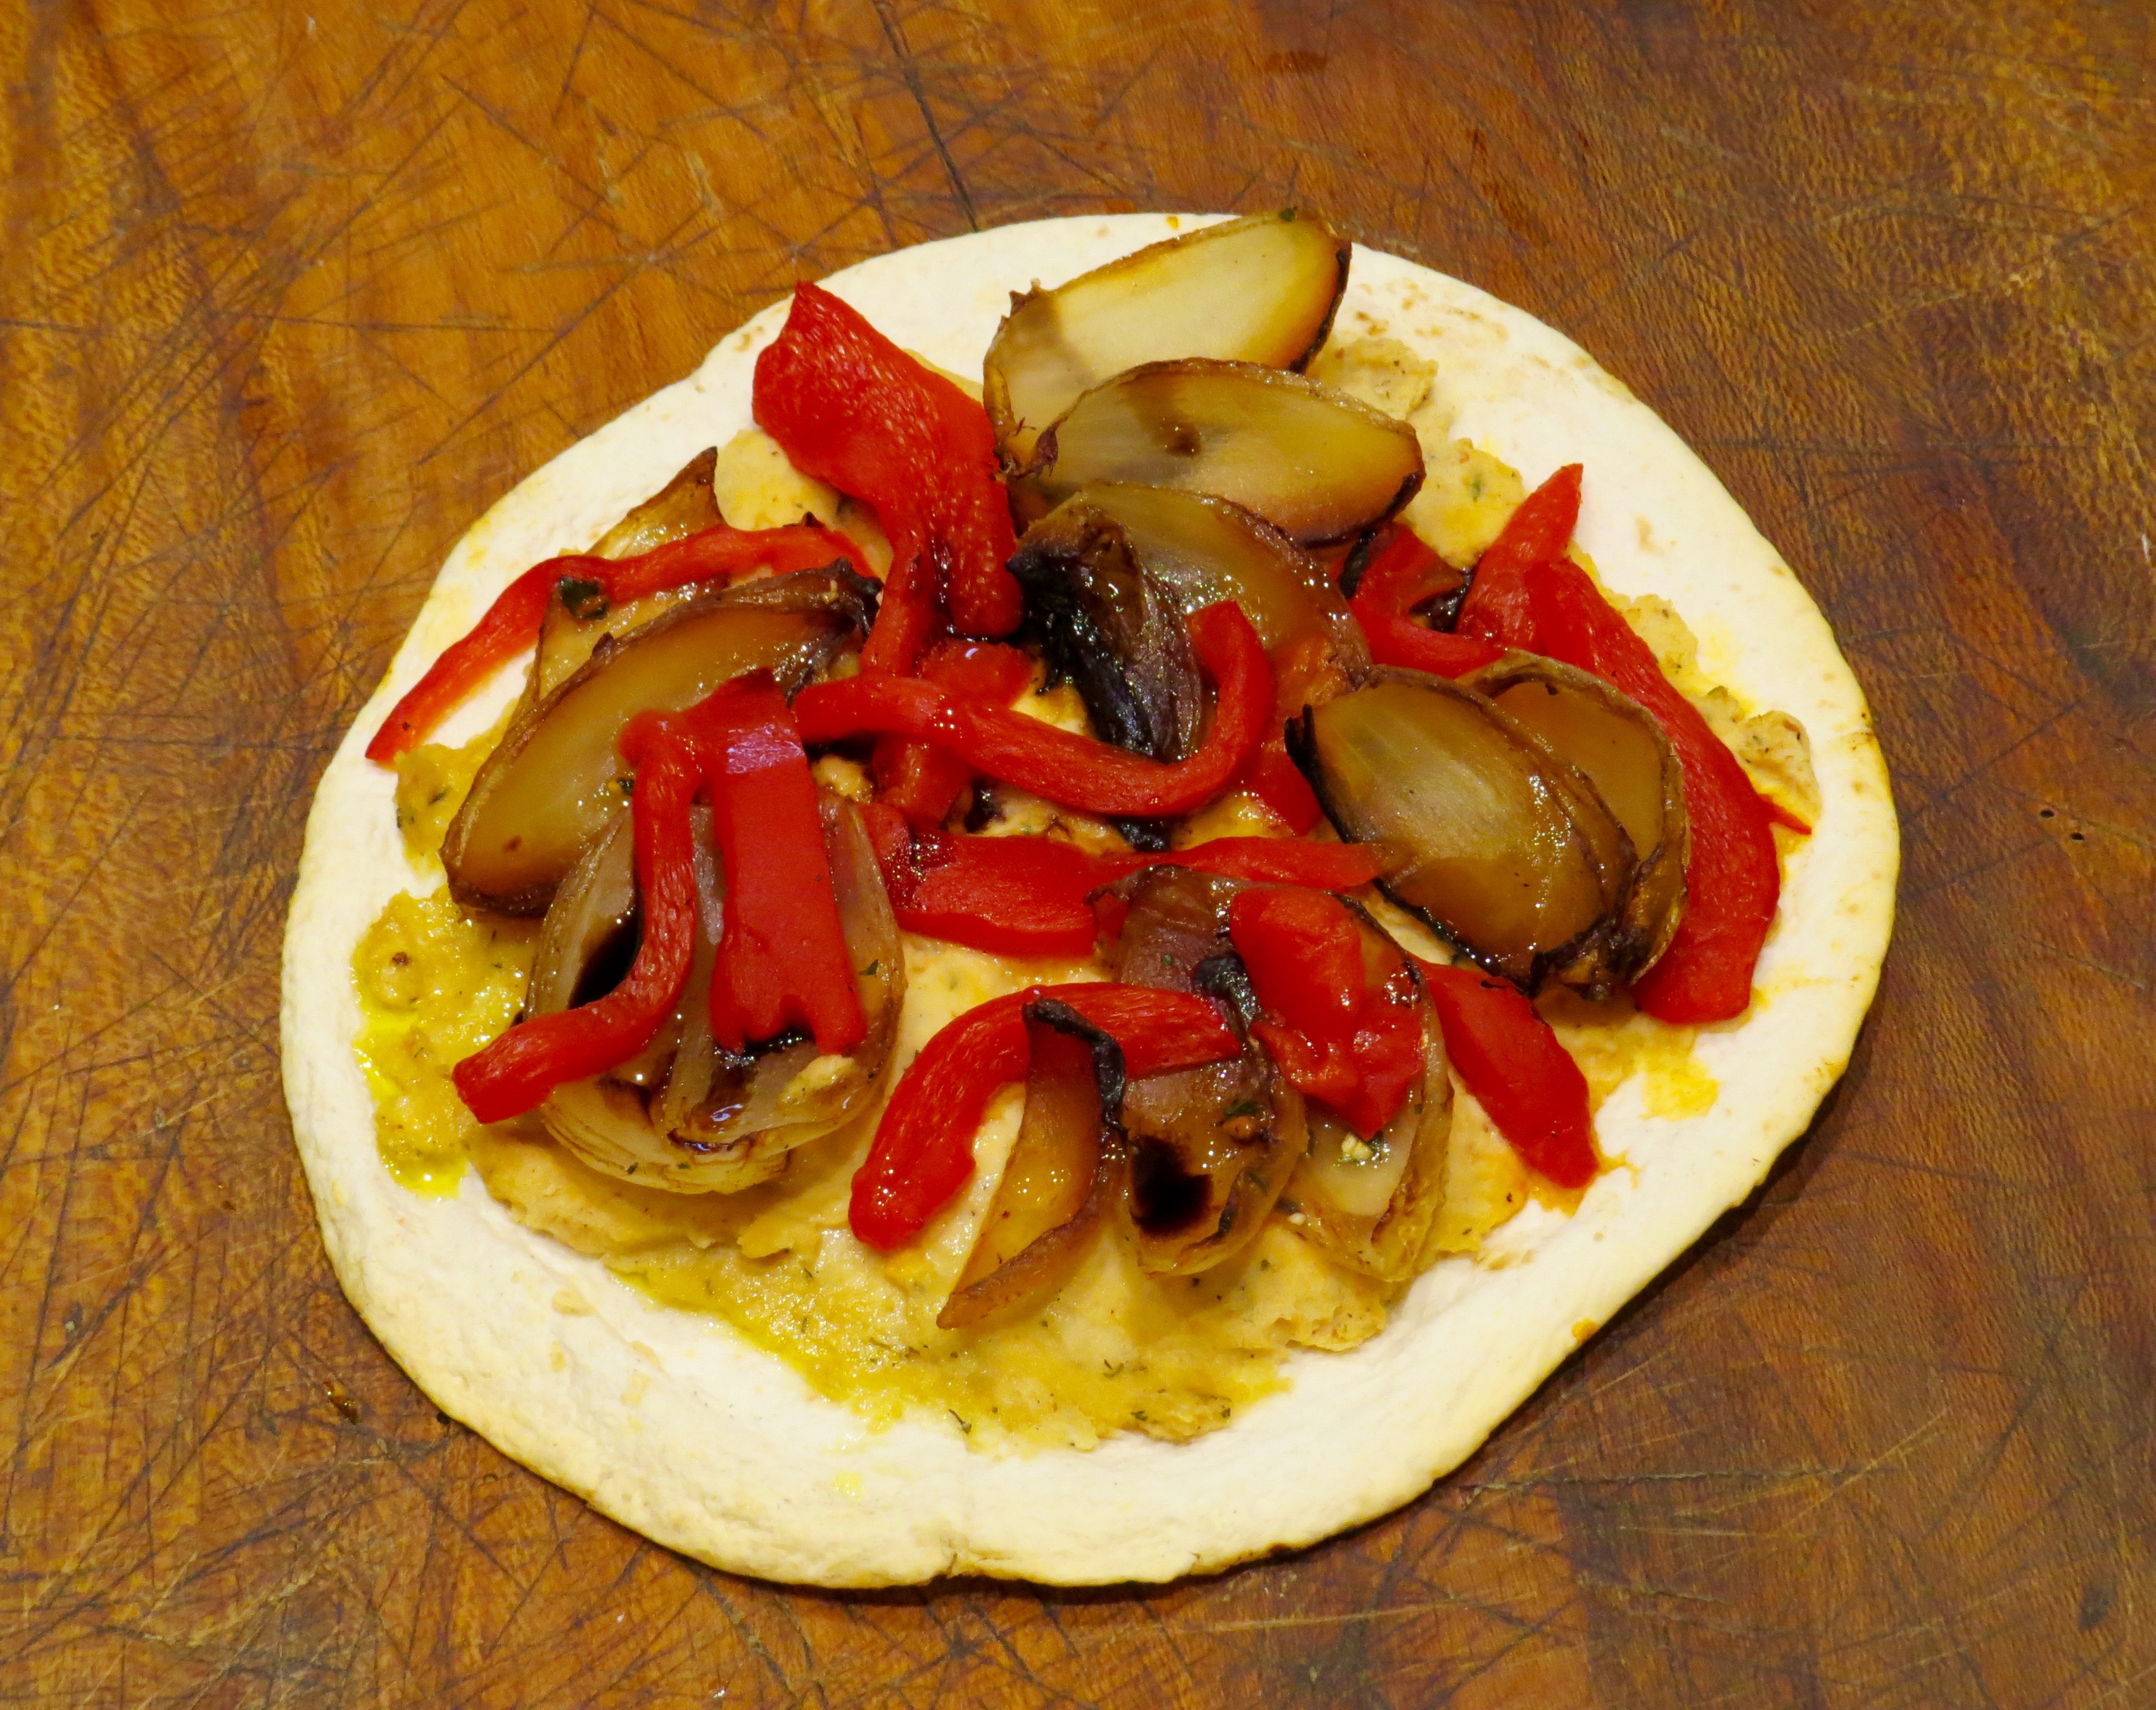 Baked Tostadas: Flour tortilla, hummus spread, roasted red-pepper slices and leftover carmelized onions from my last piece of onion tart. Just pulled from the oven - it's lunch. 